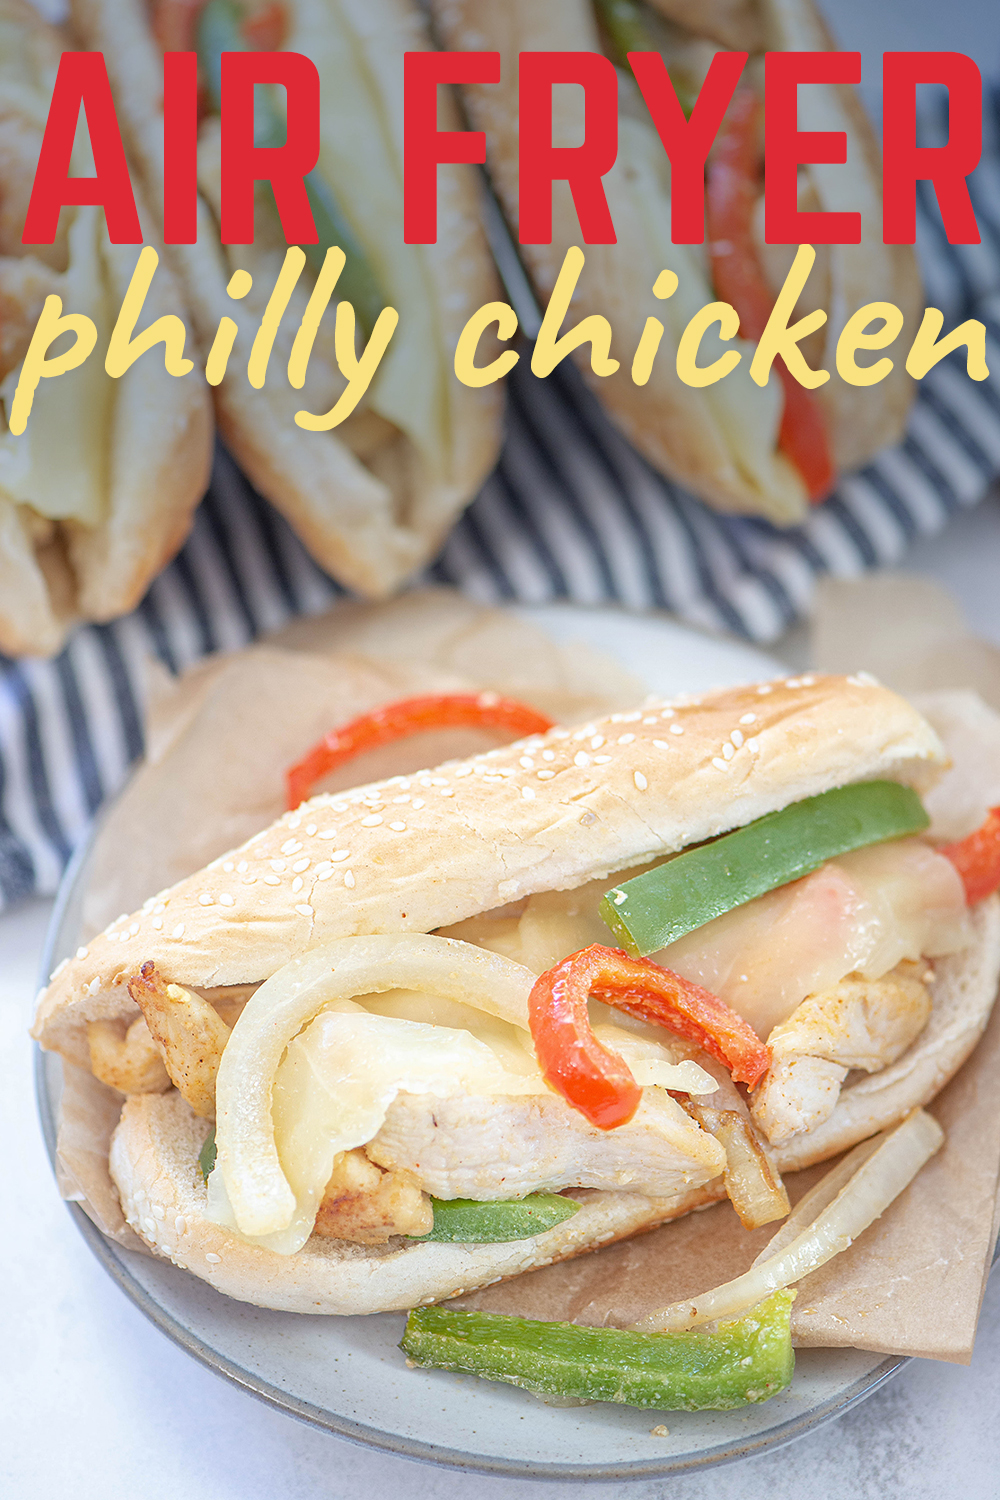 I am in love with these Philly chicken sandwiches.  Everything cooks together in the air fryer keeping it super simple too!